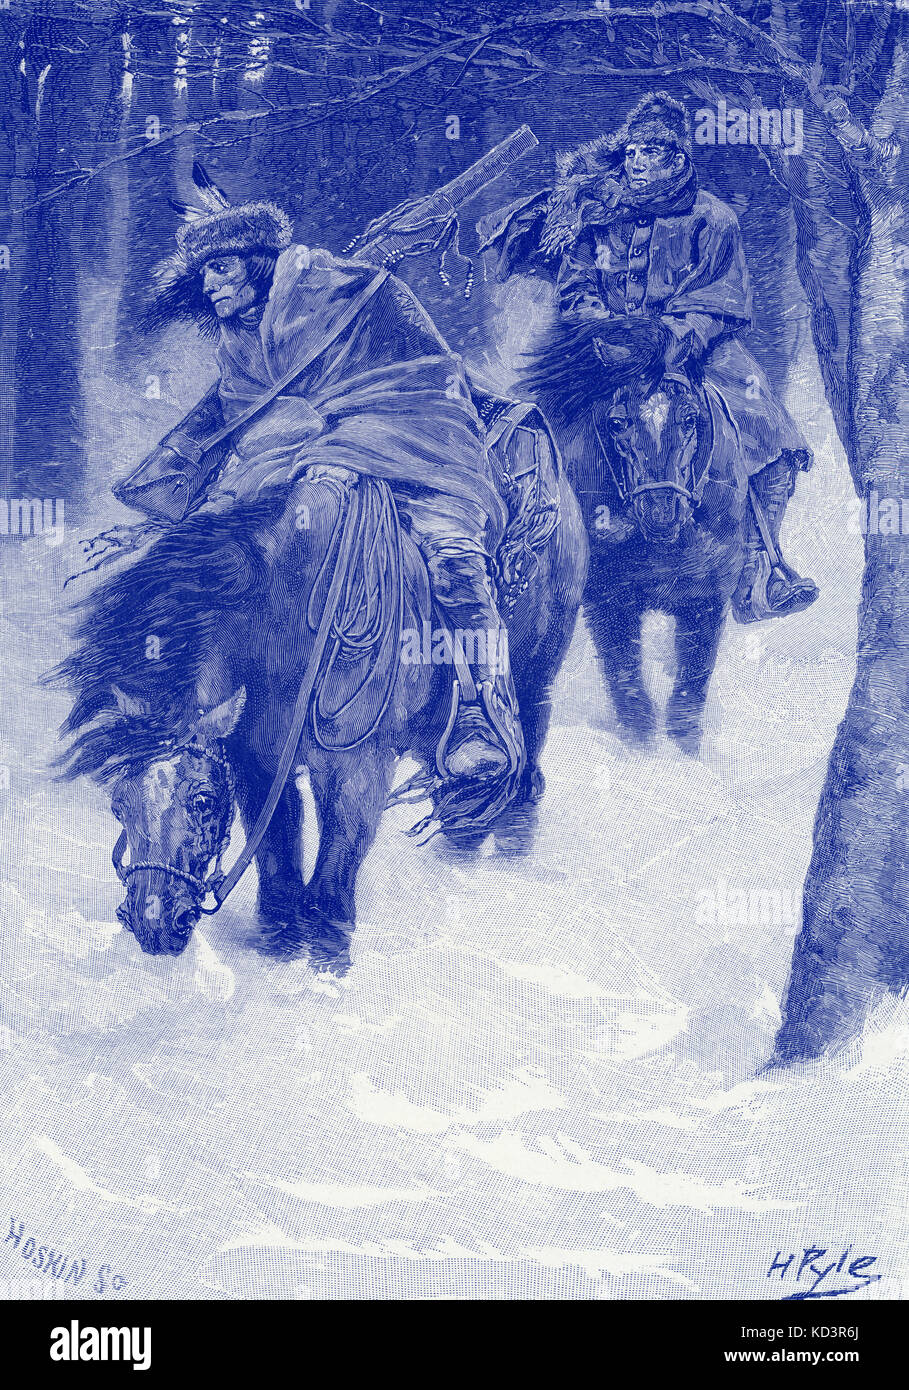 Daniel Boone's exploration of Tennessee, 1700s. Illustration by Howard Pyle, 1886 Stock Photo